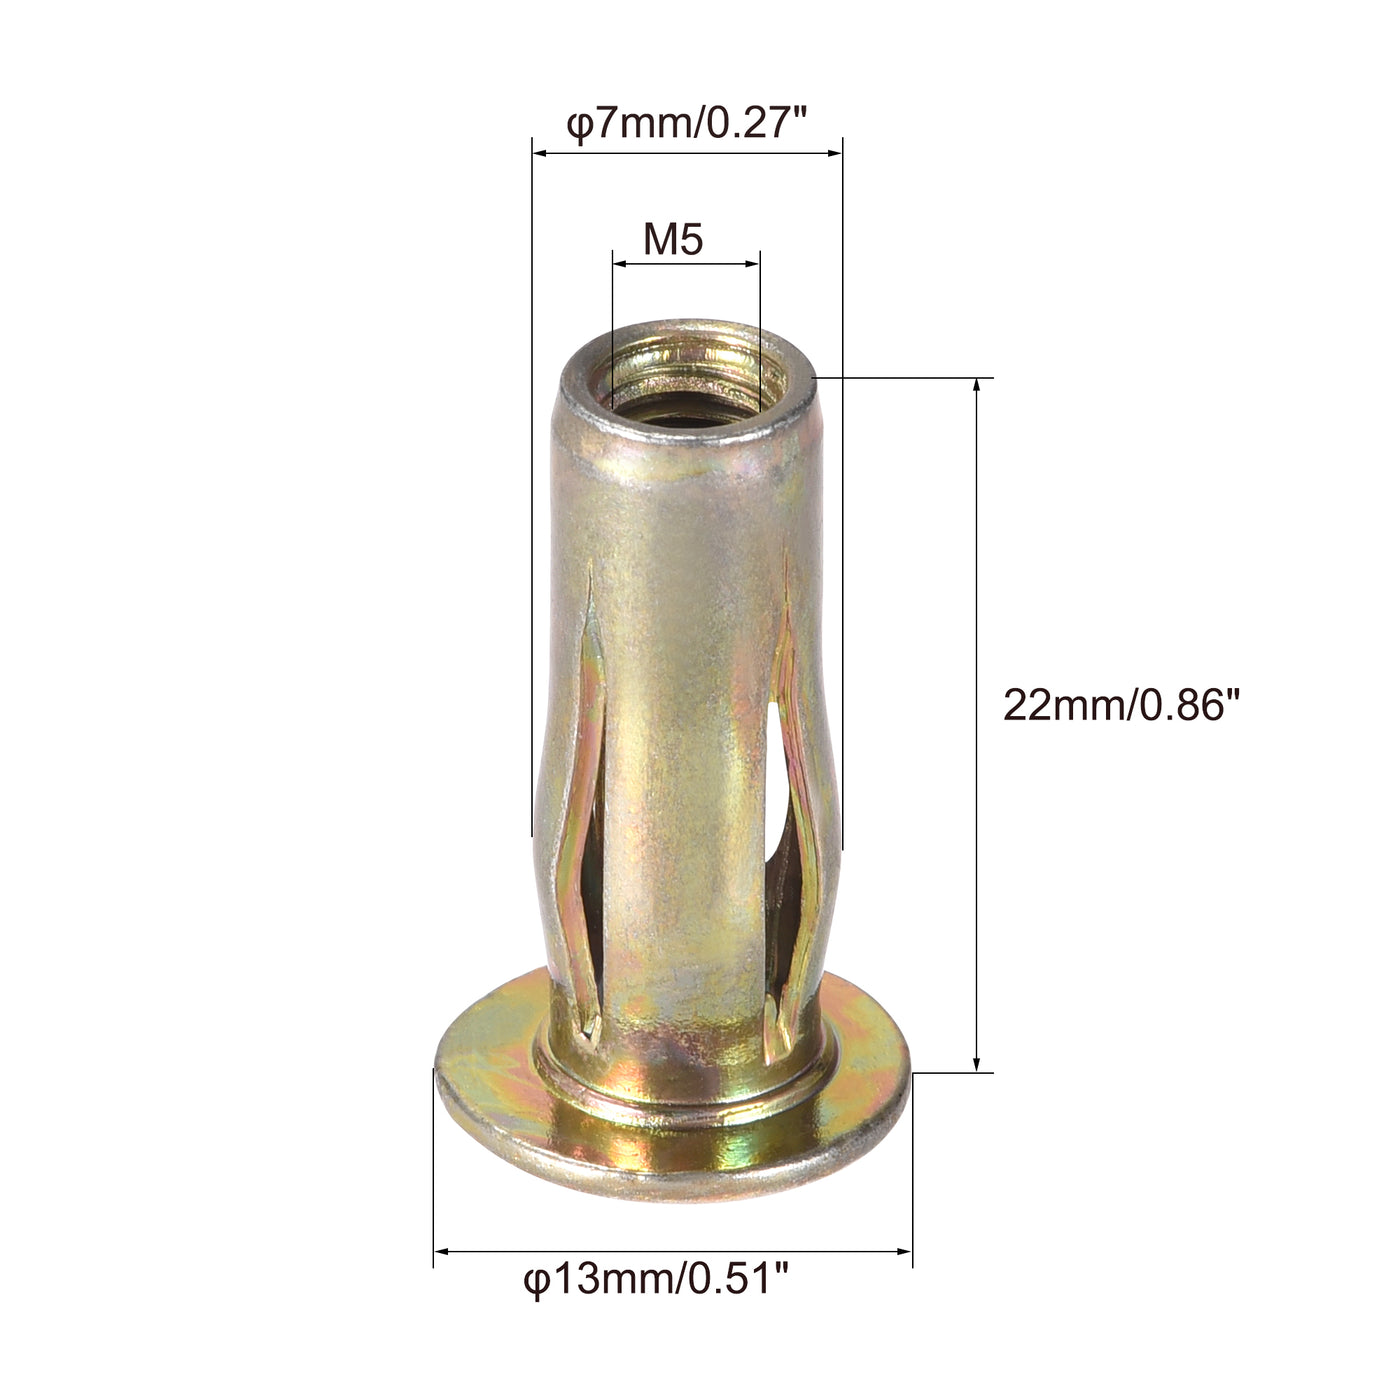 uxcell Uxcell Multi-Grip Rivet-Nut, Pre-Bulbed Shank Carbon Steel for Anti-Rotation